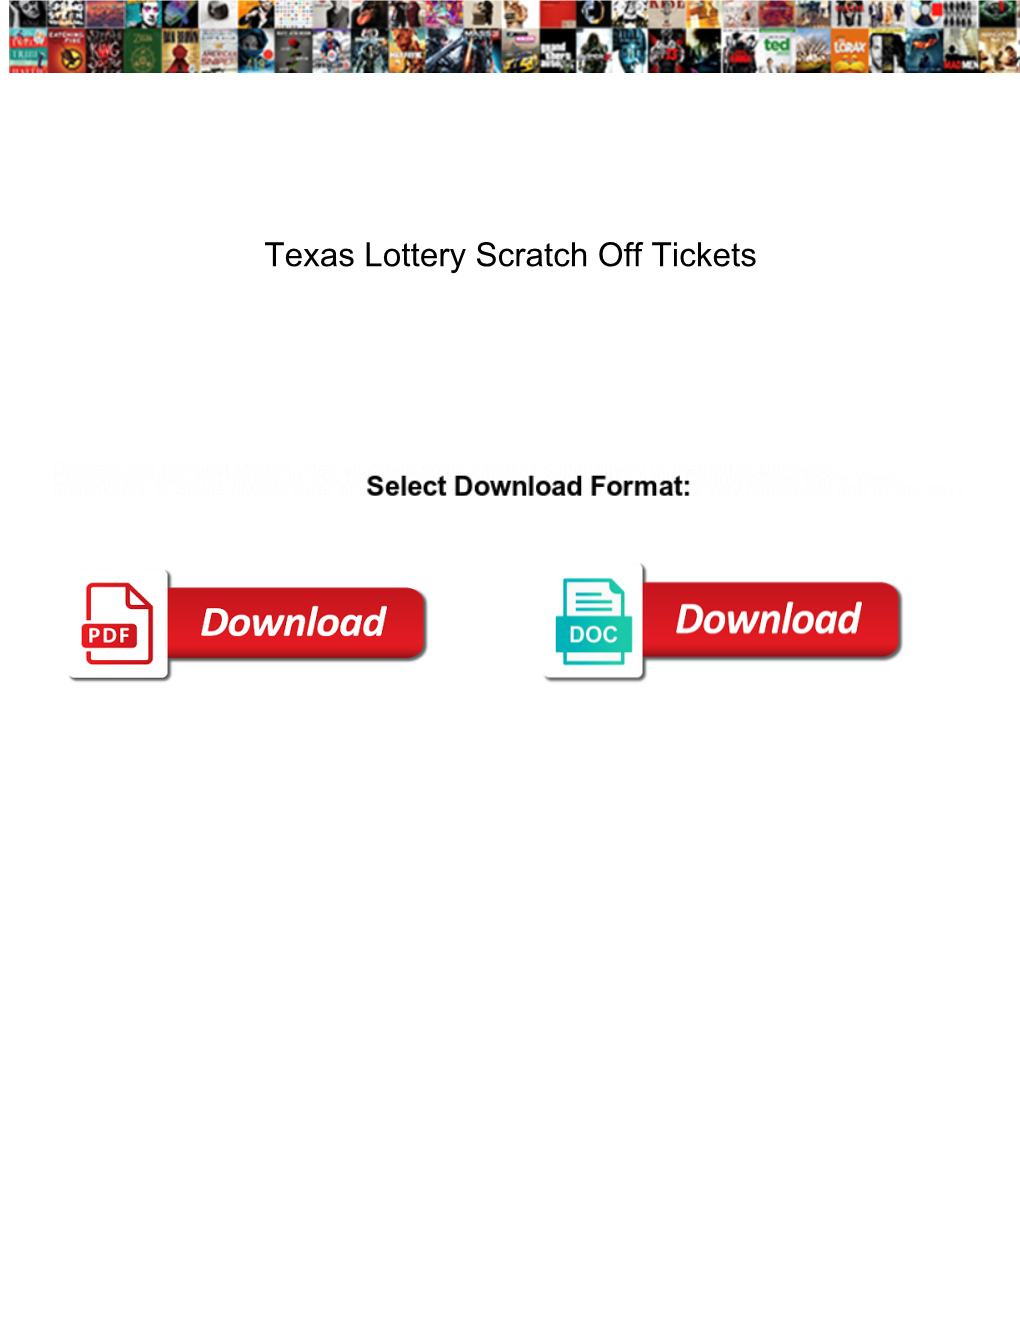 Texas Lottery Scratch Off Tickets